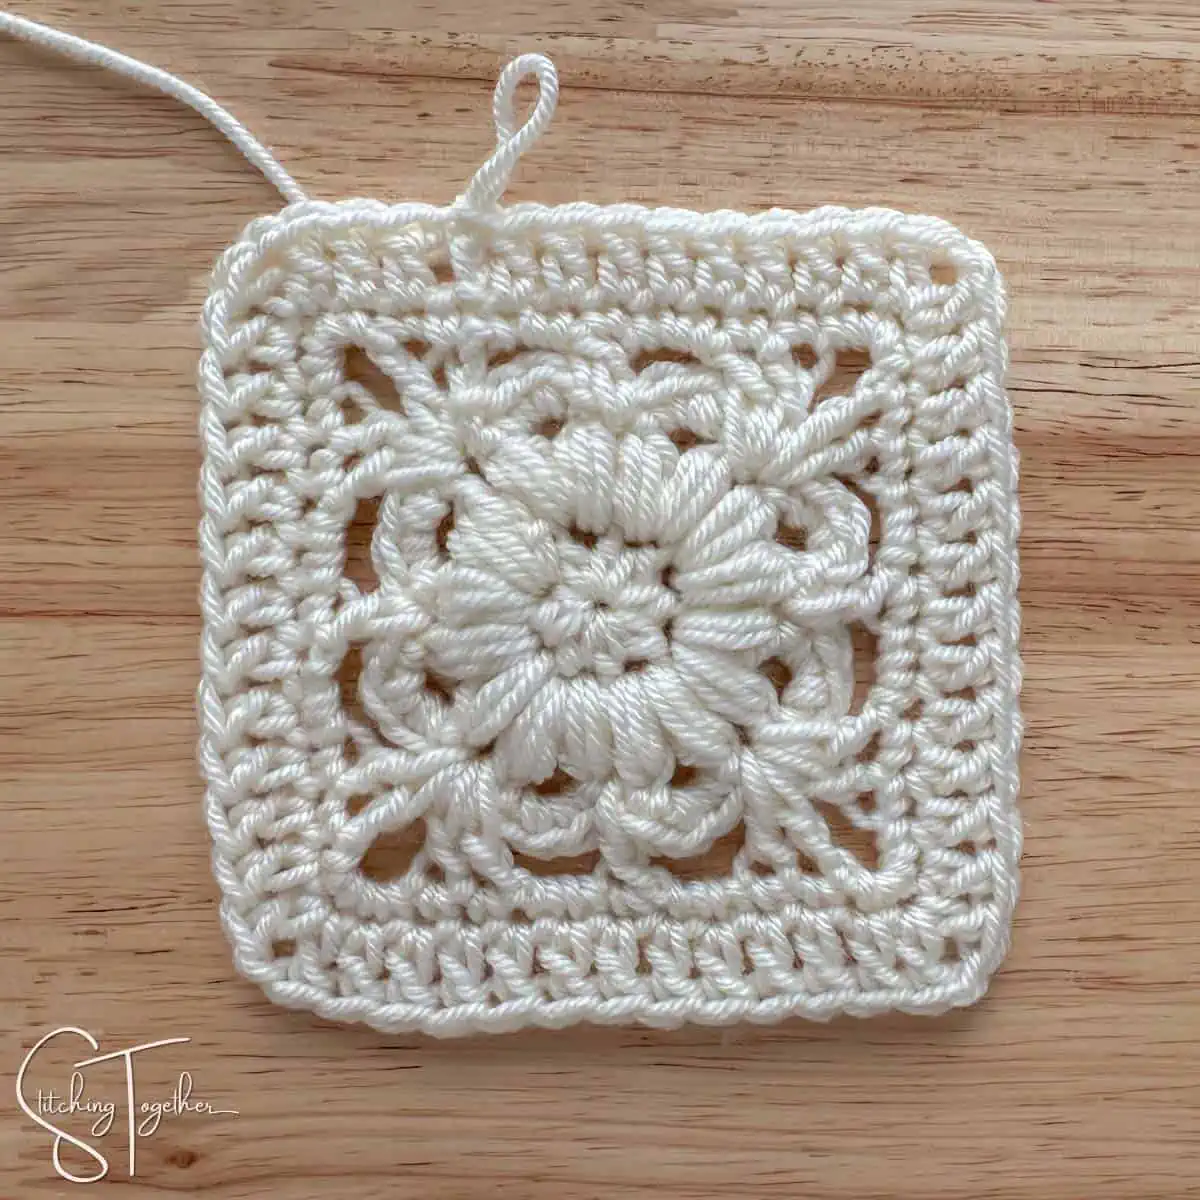 crochet flower square just finished with the yarn still attached